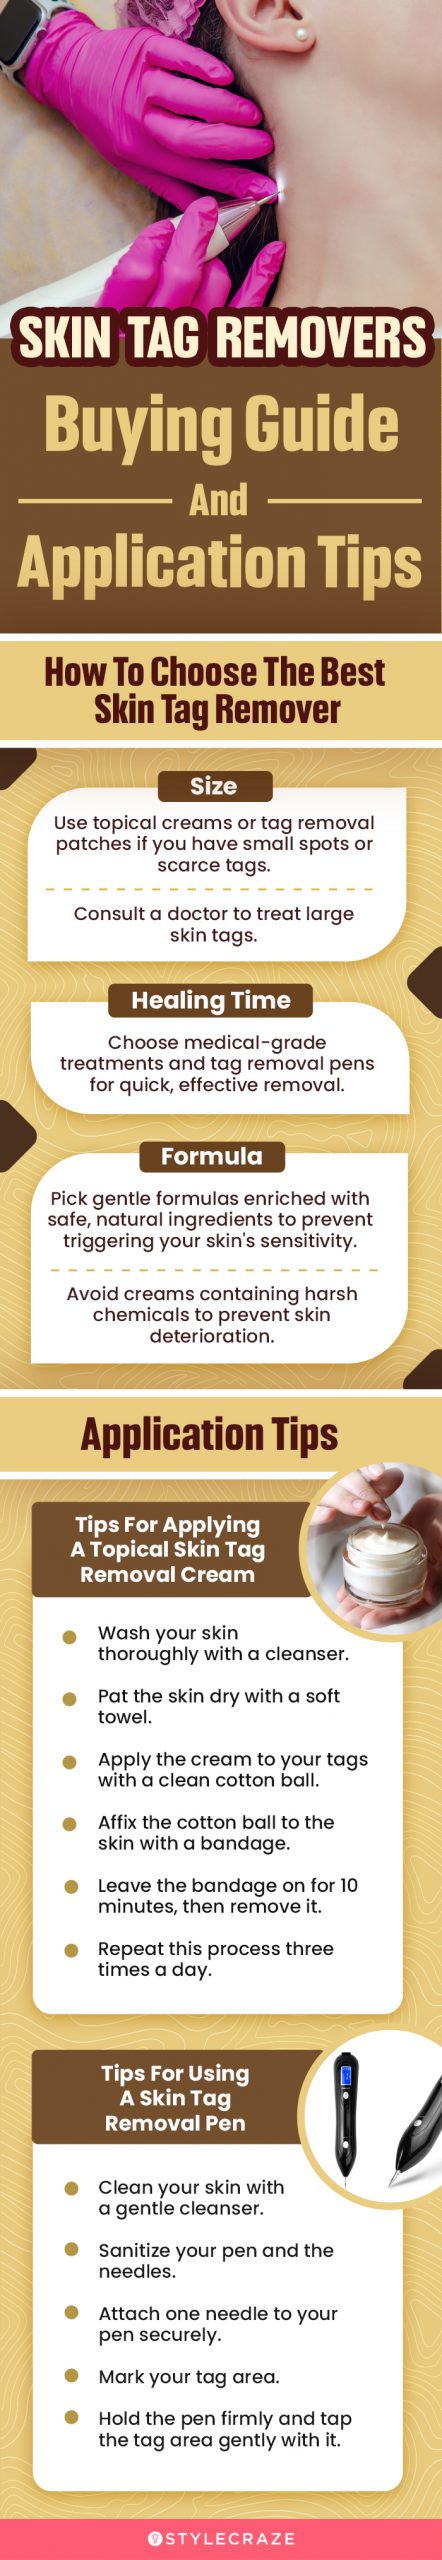 Skin Tag Removers: Buying Guide And Application Tips (infographic)